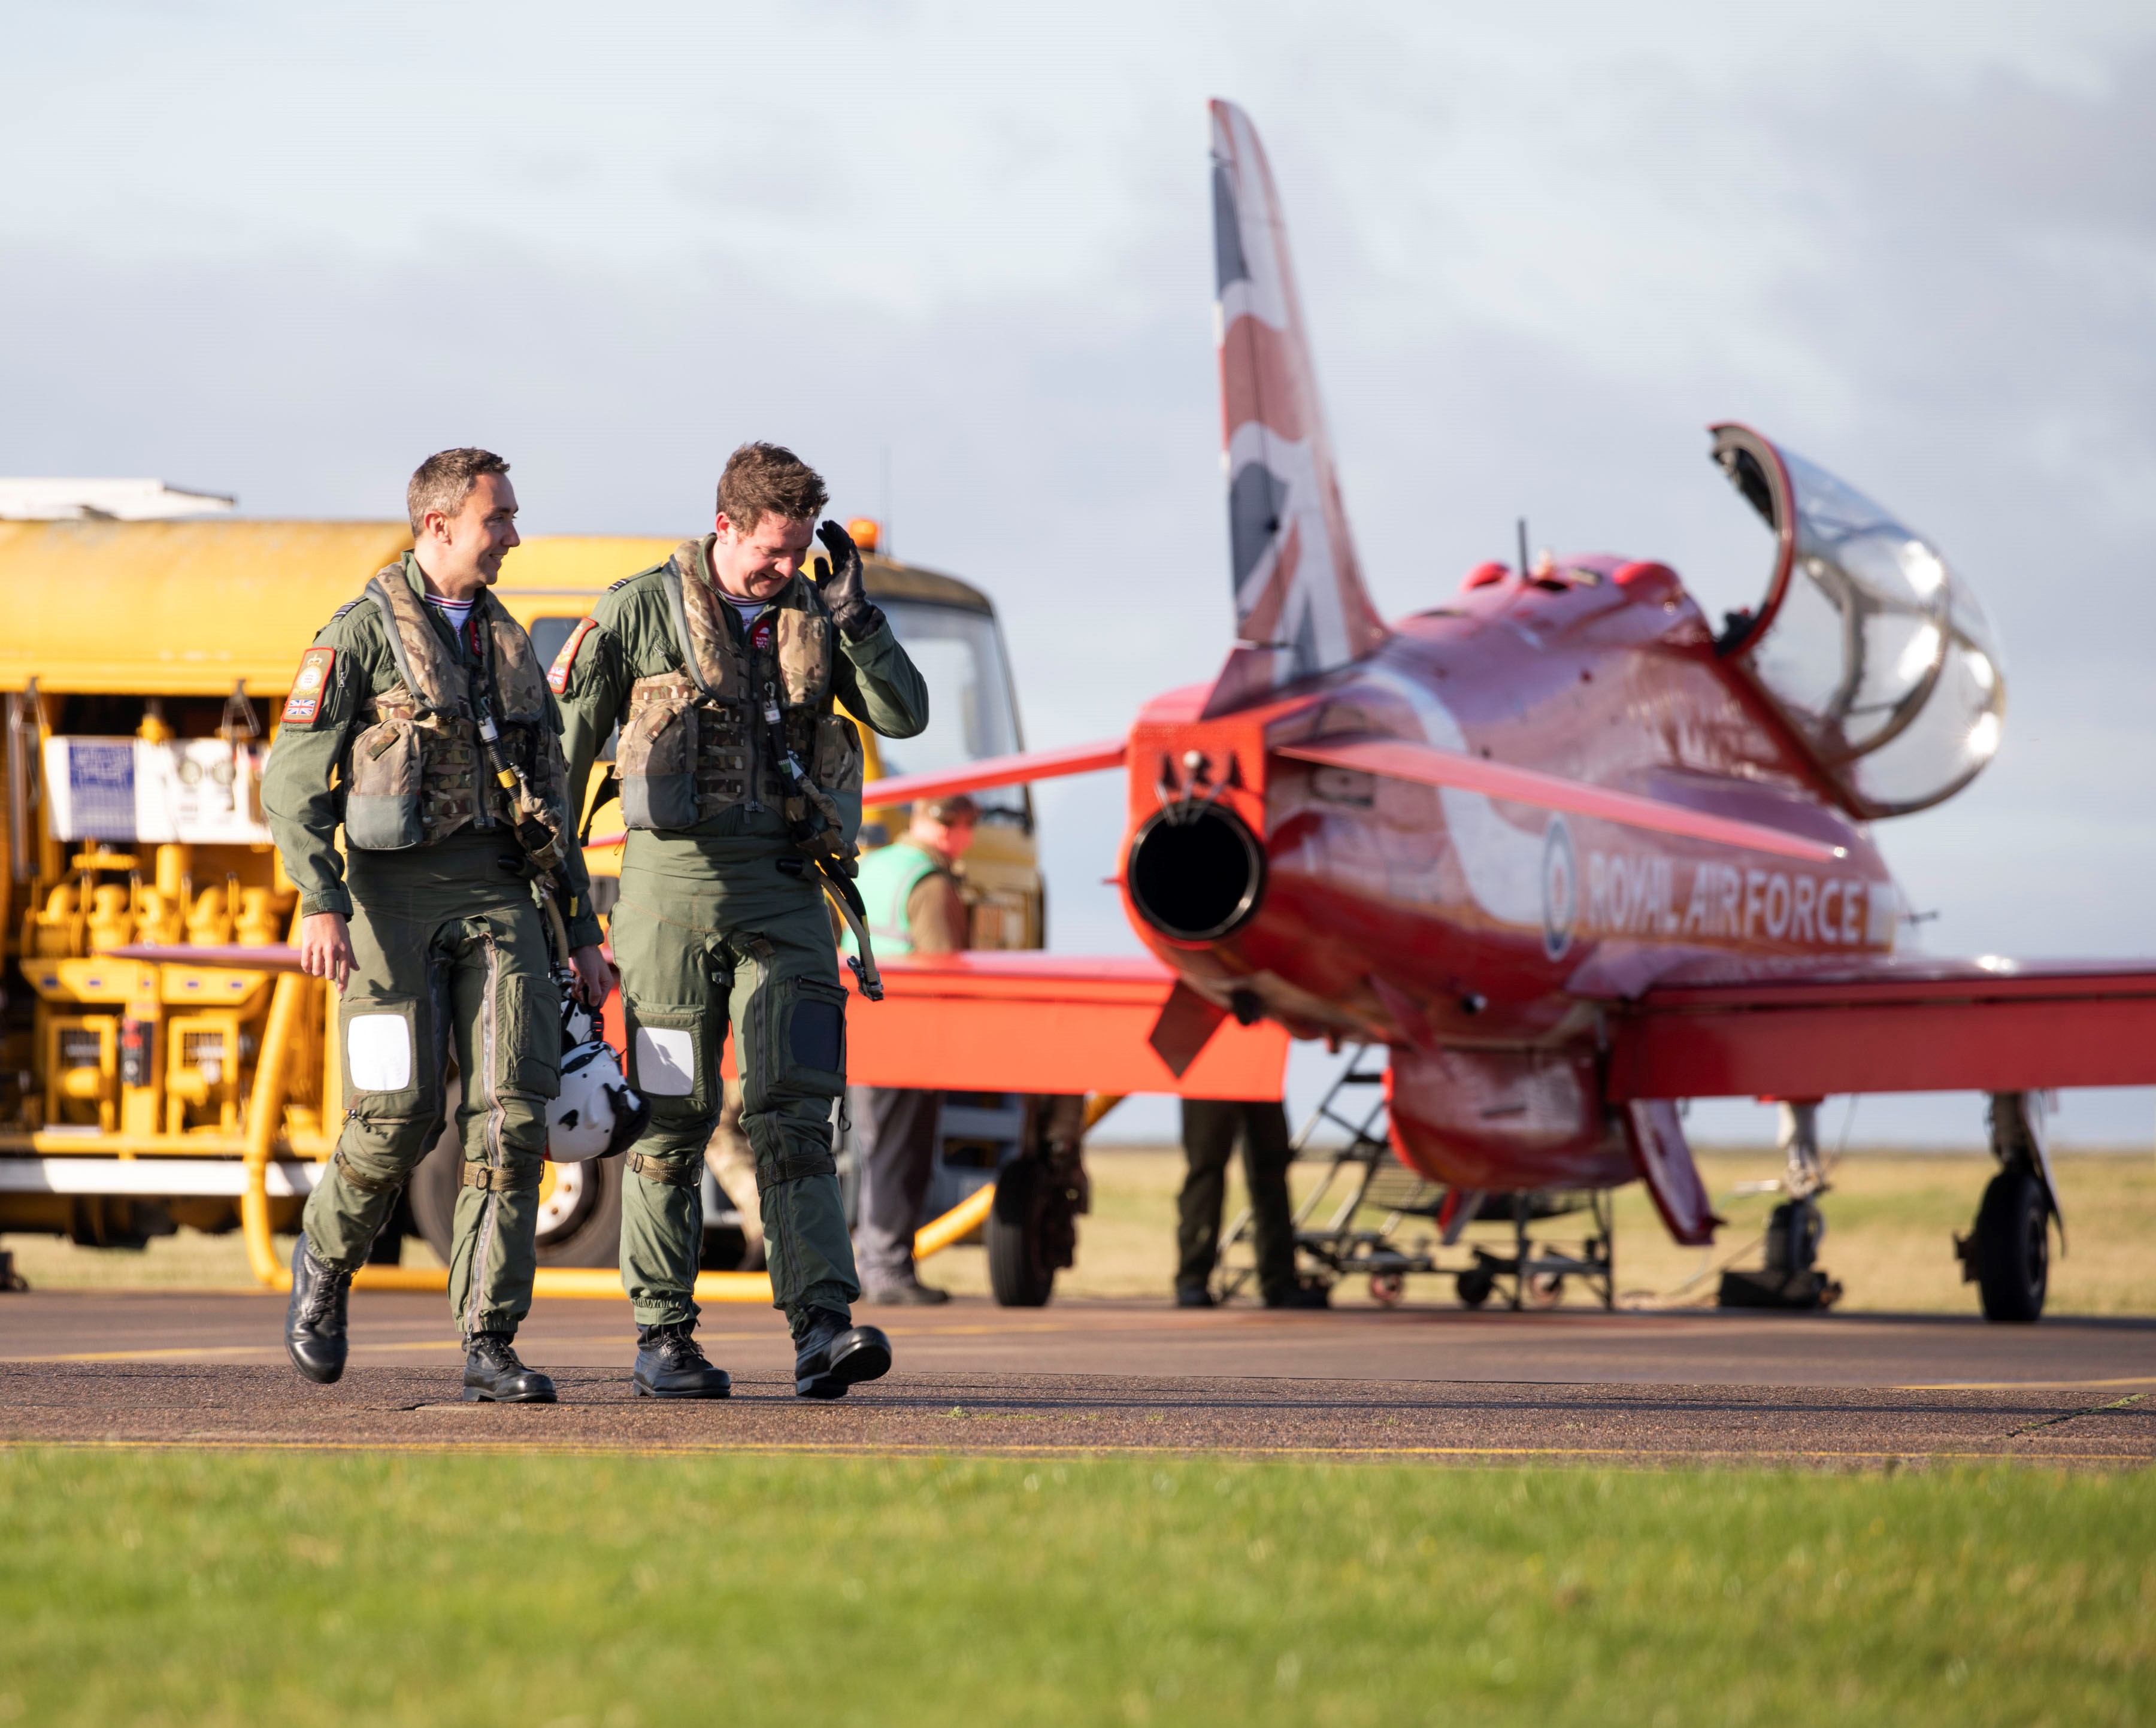 Training is already underway for the new Red 3, alongside existing team pilots.